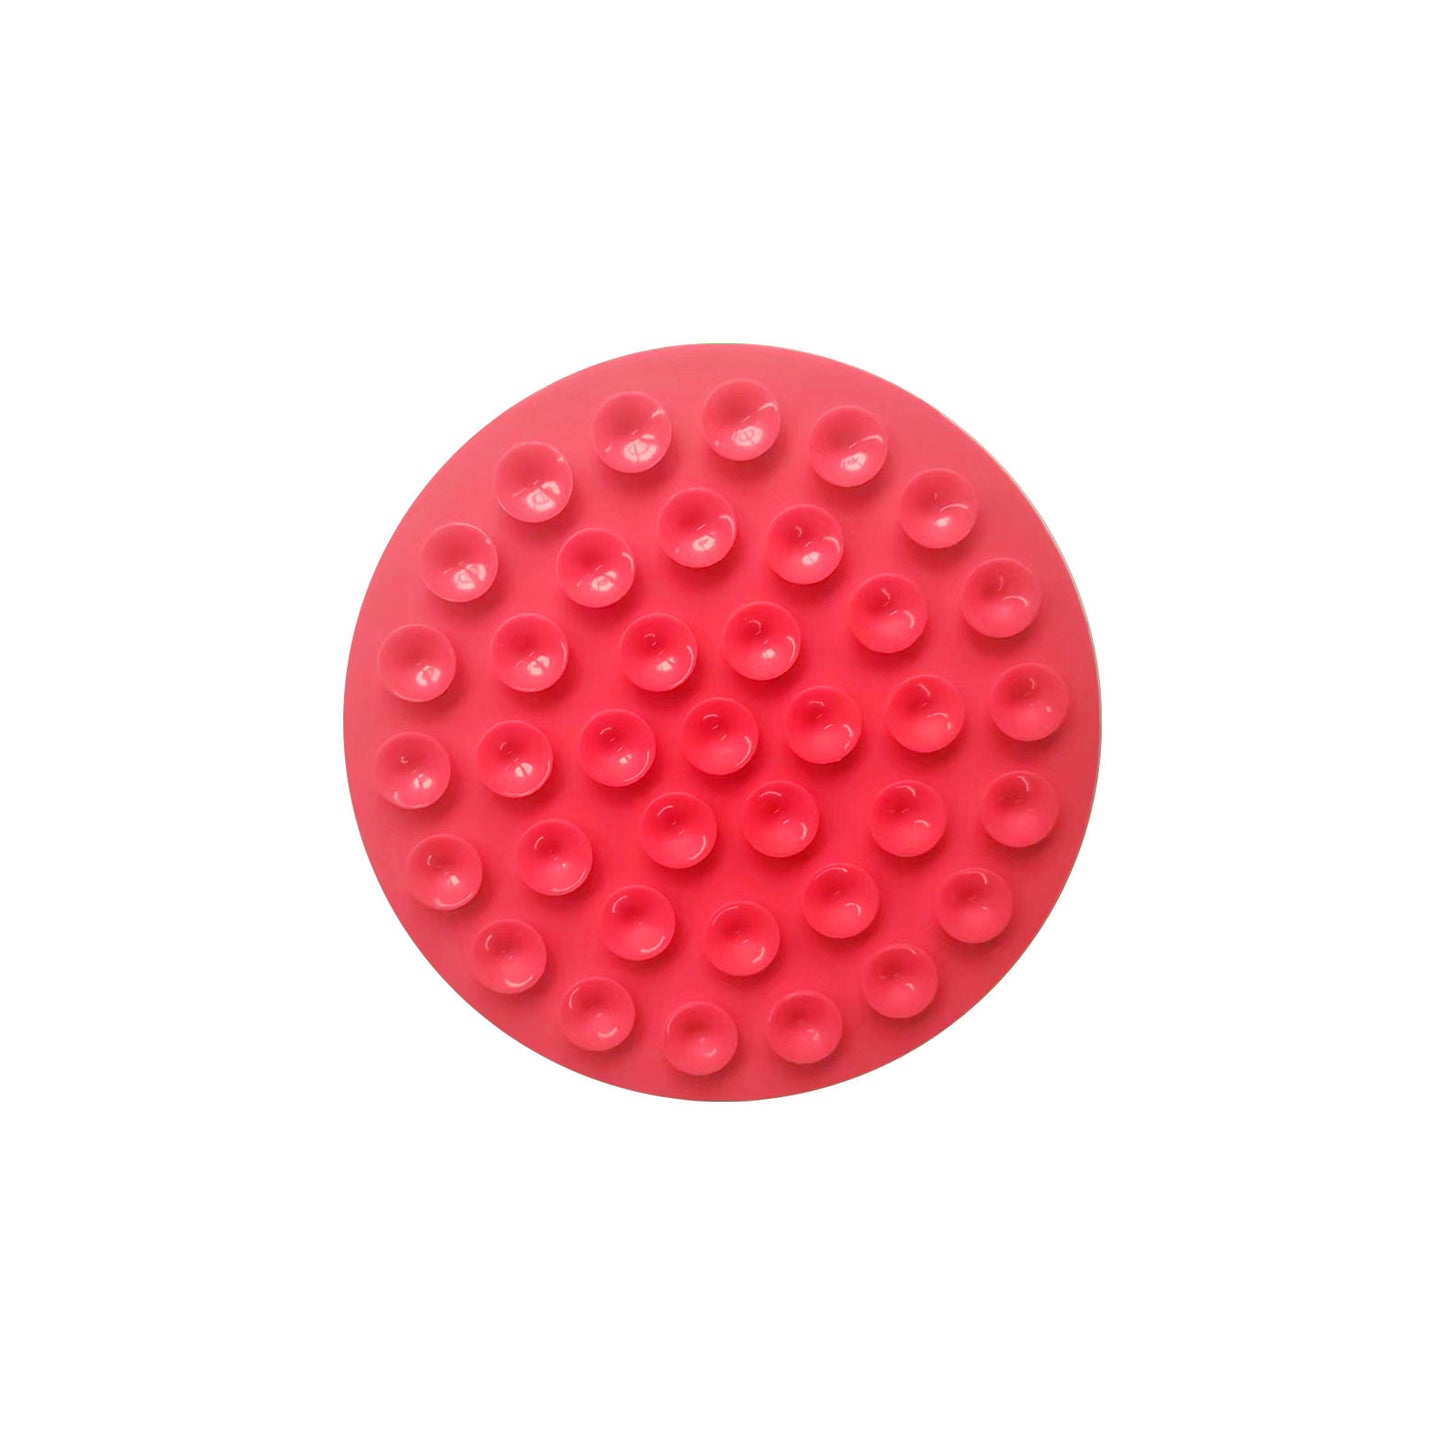 Pawfriends Silicone Dog Cat Pet Licking Pad Anti-Anxiety Slow-Feeding Licking Pad Red